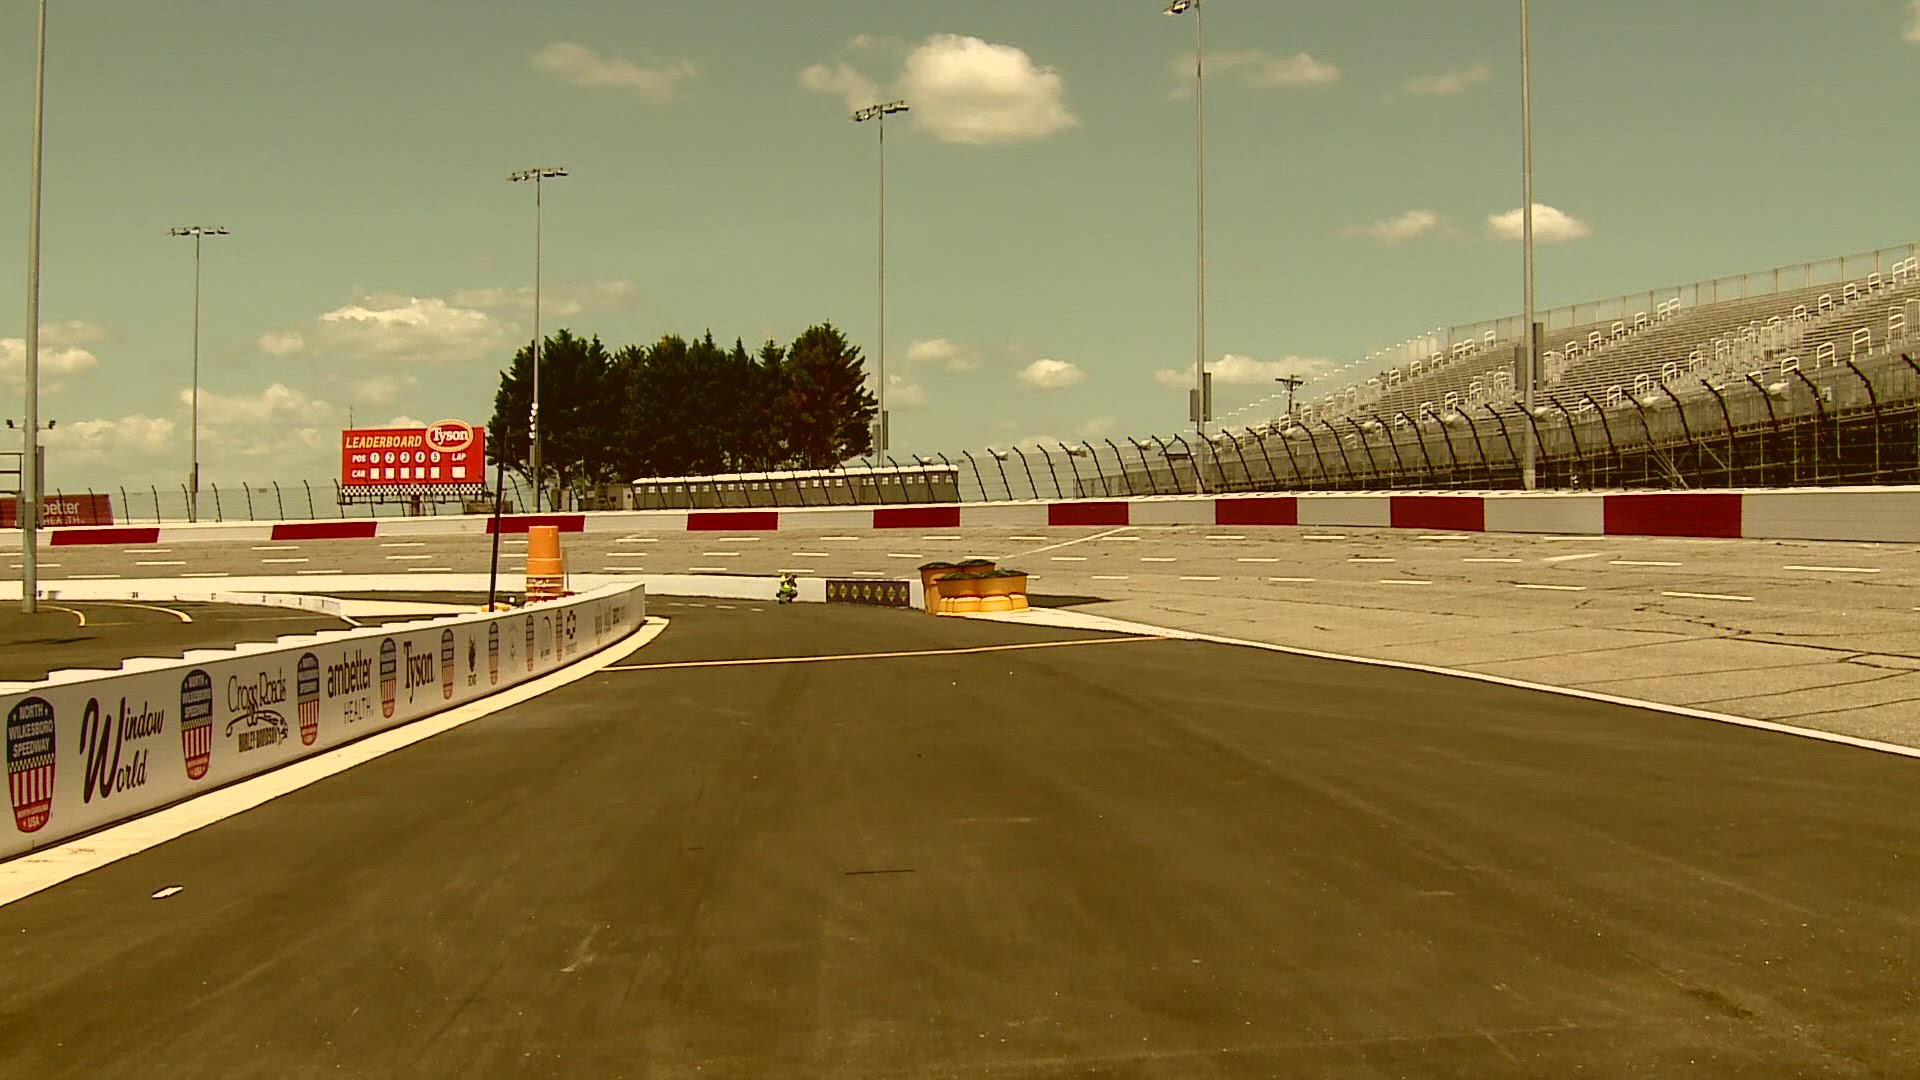 NASCAR returns to North Wilkesboro Speedway for the first time in 26 years. WFMY News 2 looks back at the track's history and the push forward for racing's return.